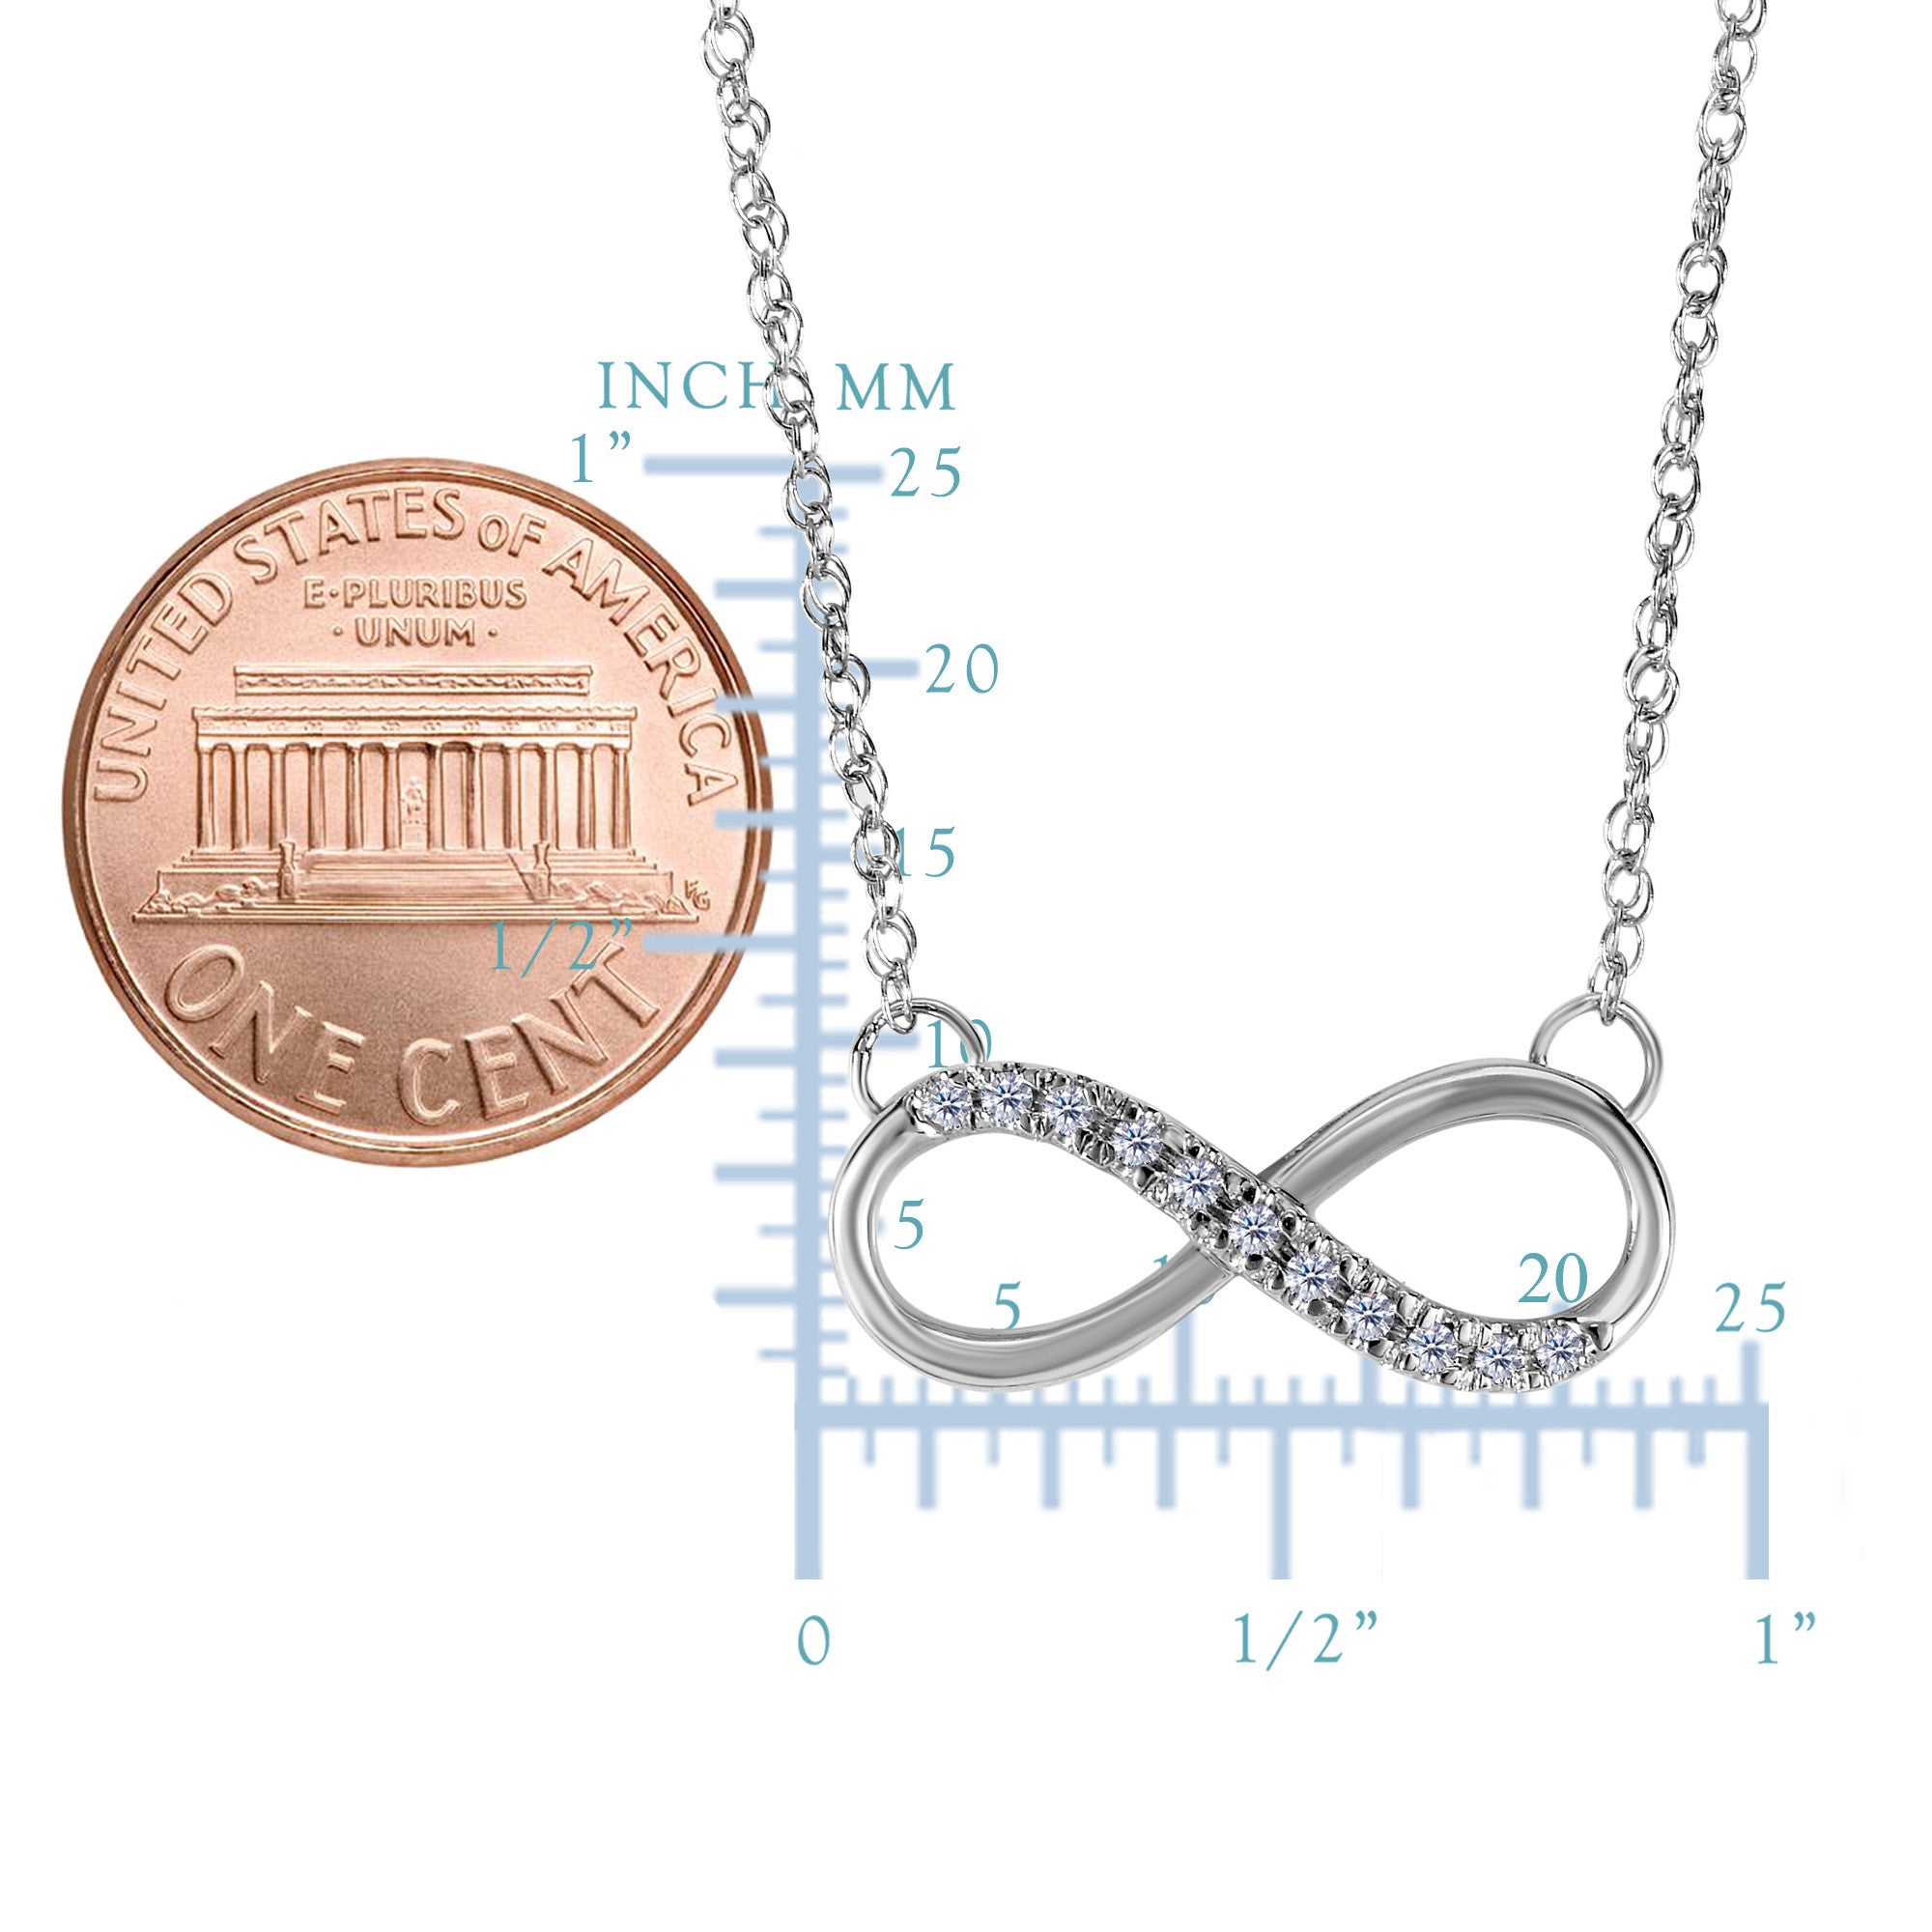 14K White Gold With 0.10 Ct Diamonds Infinity Necklace - 18 Inches - JewelryAffairs
 - 2